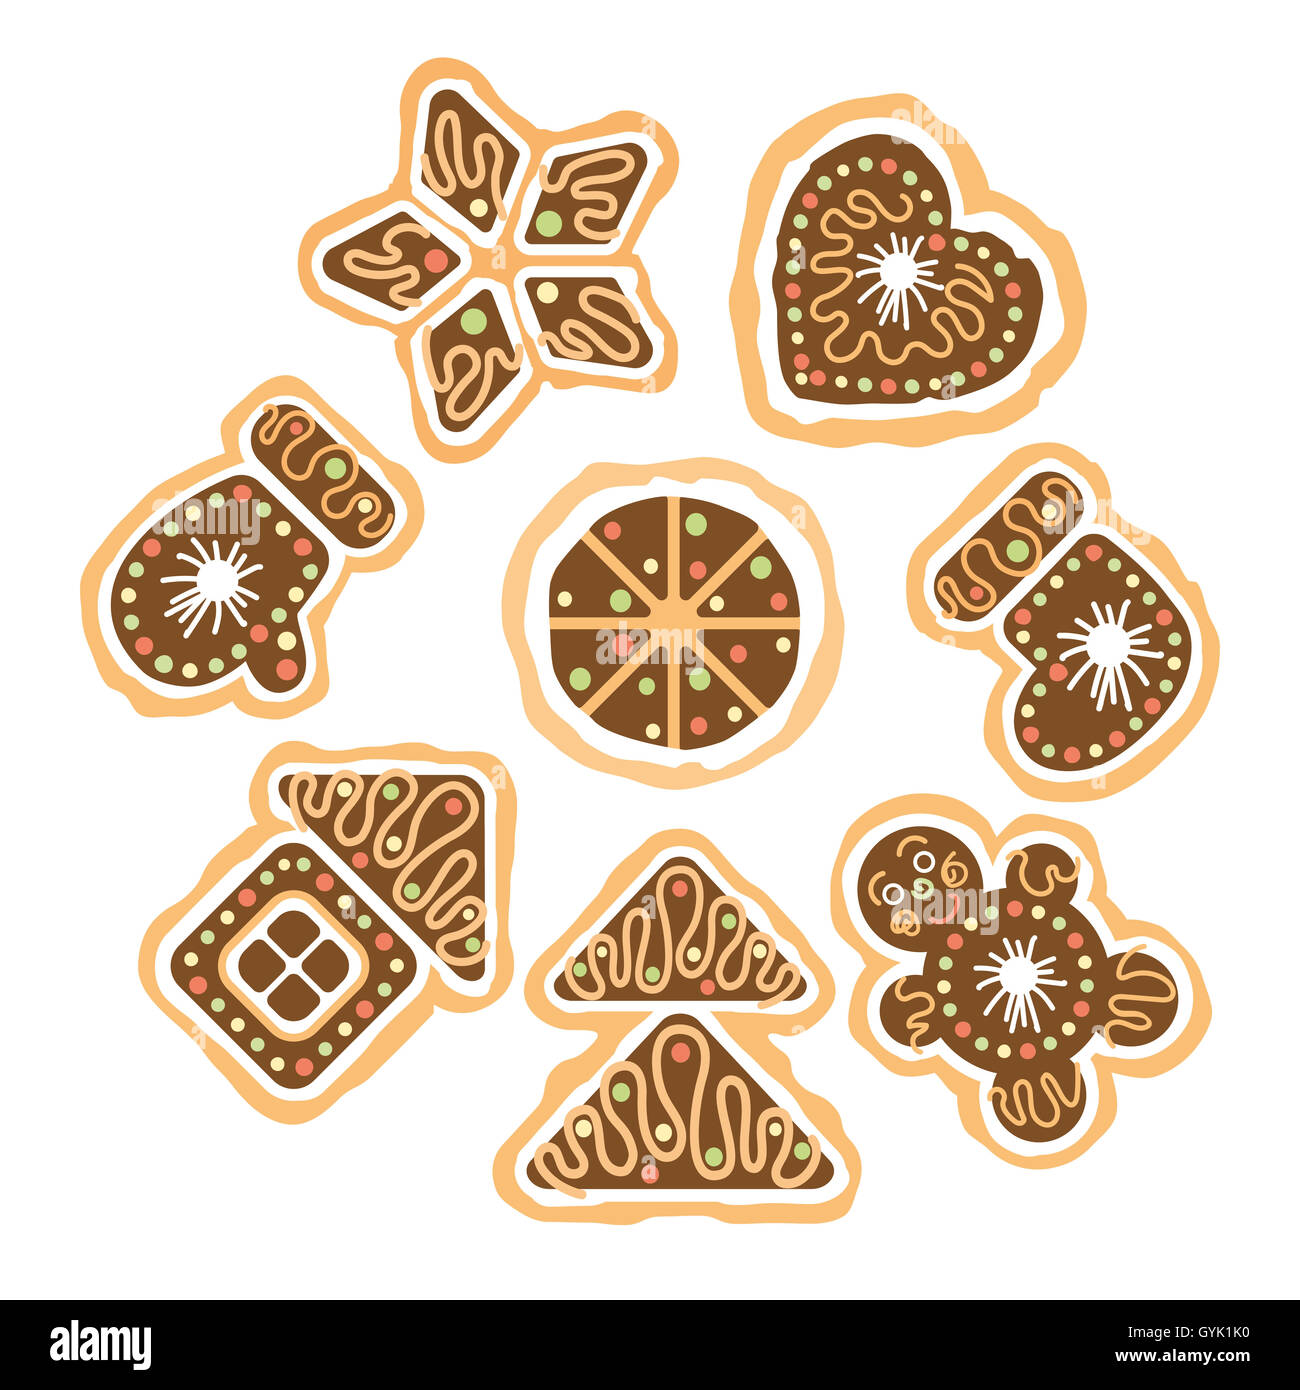 Set of gingerbread, elements for christmas design. Stock Photo